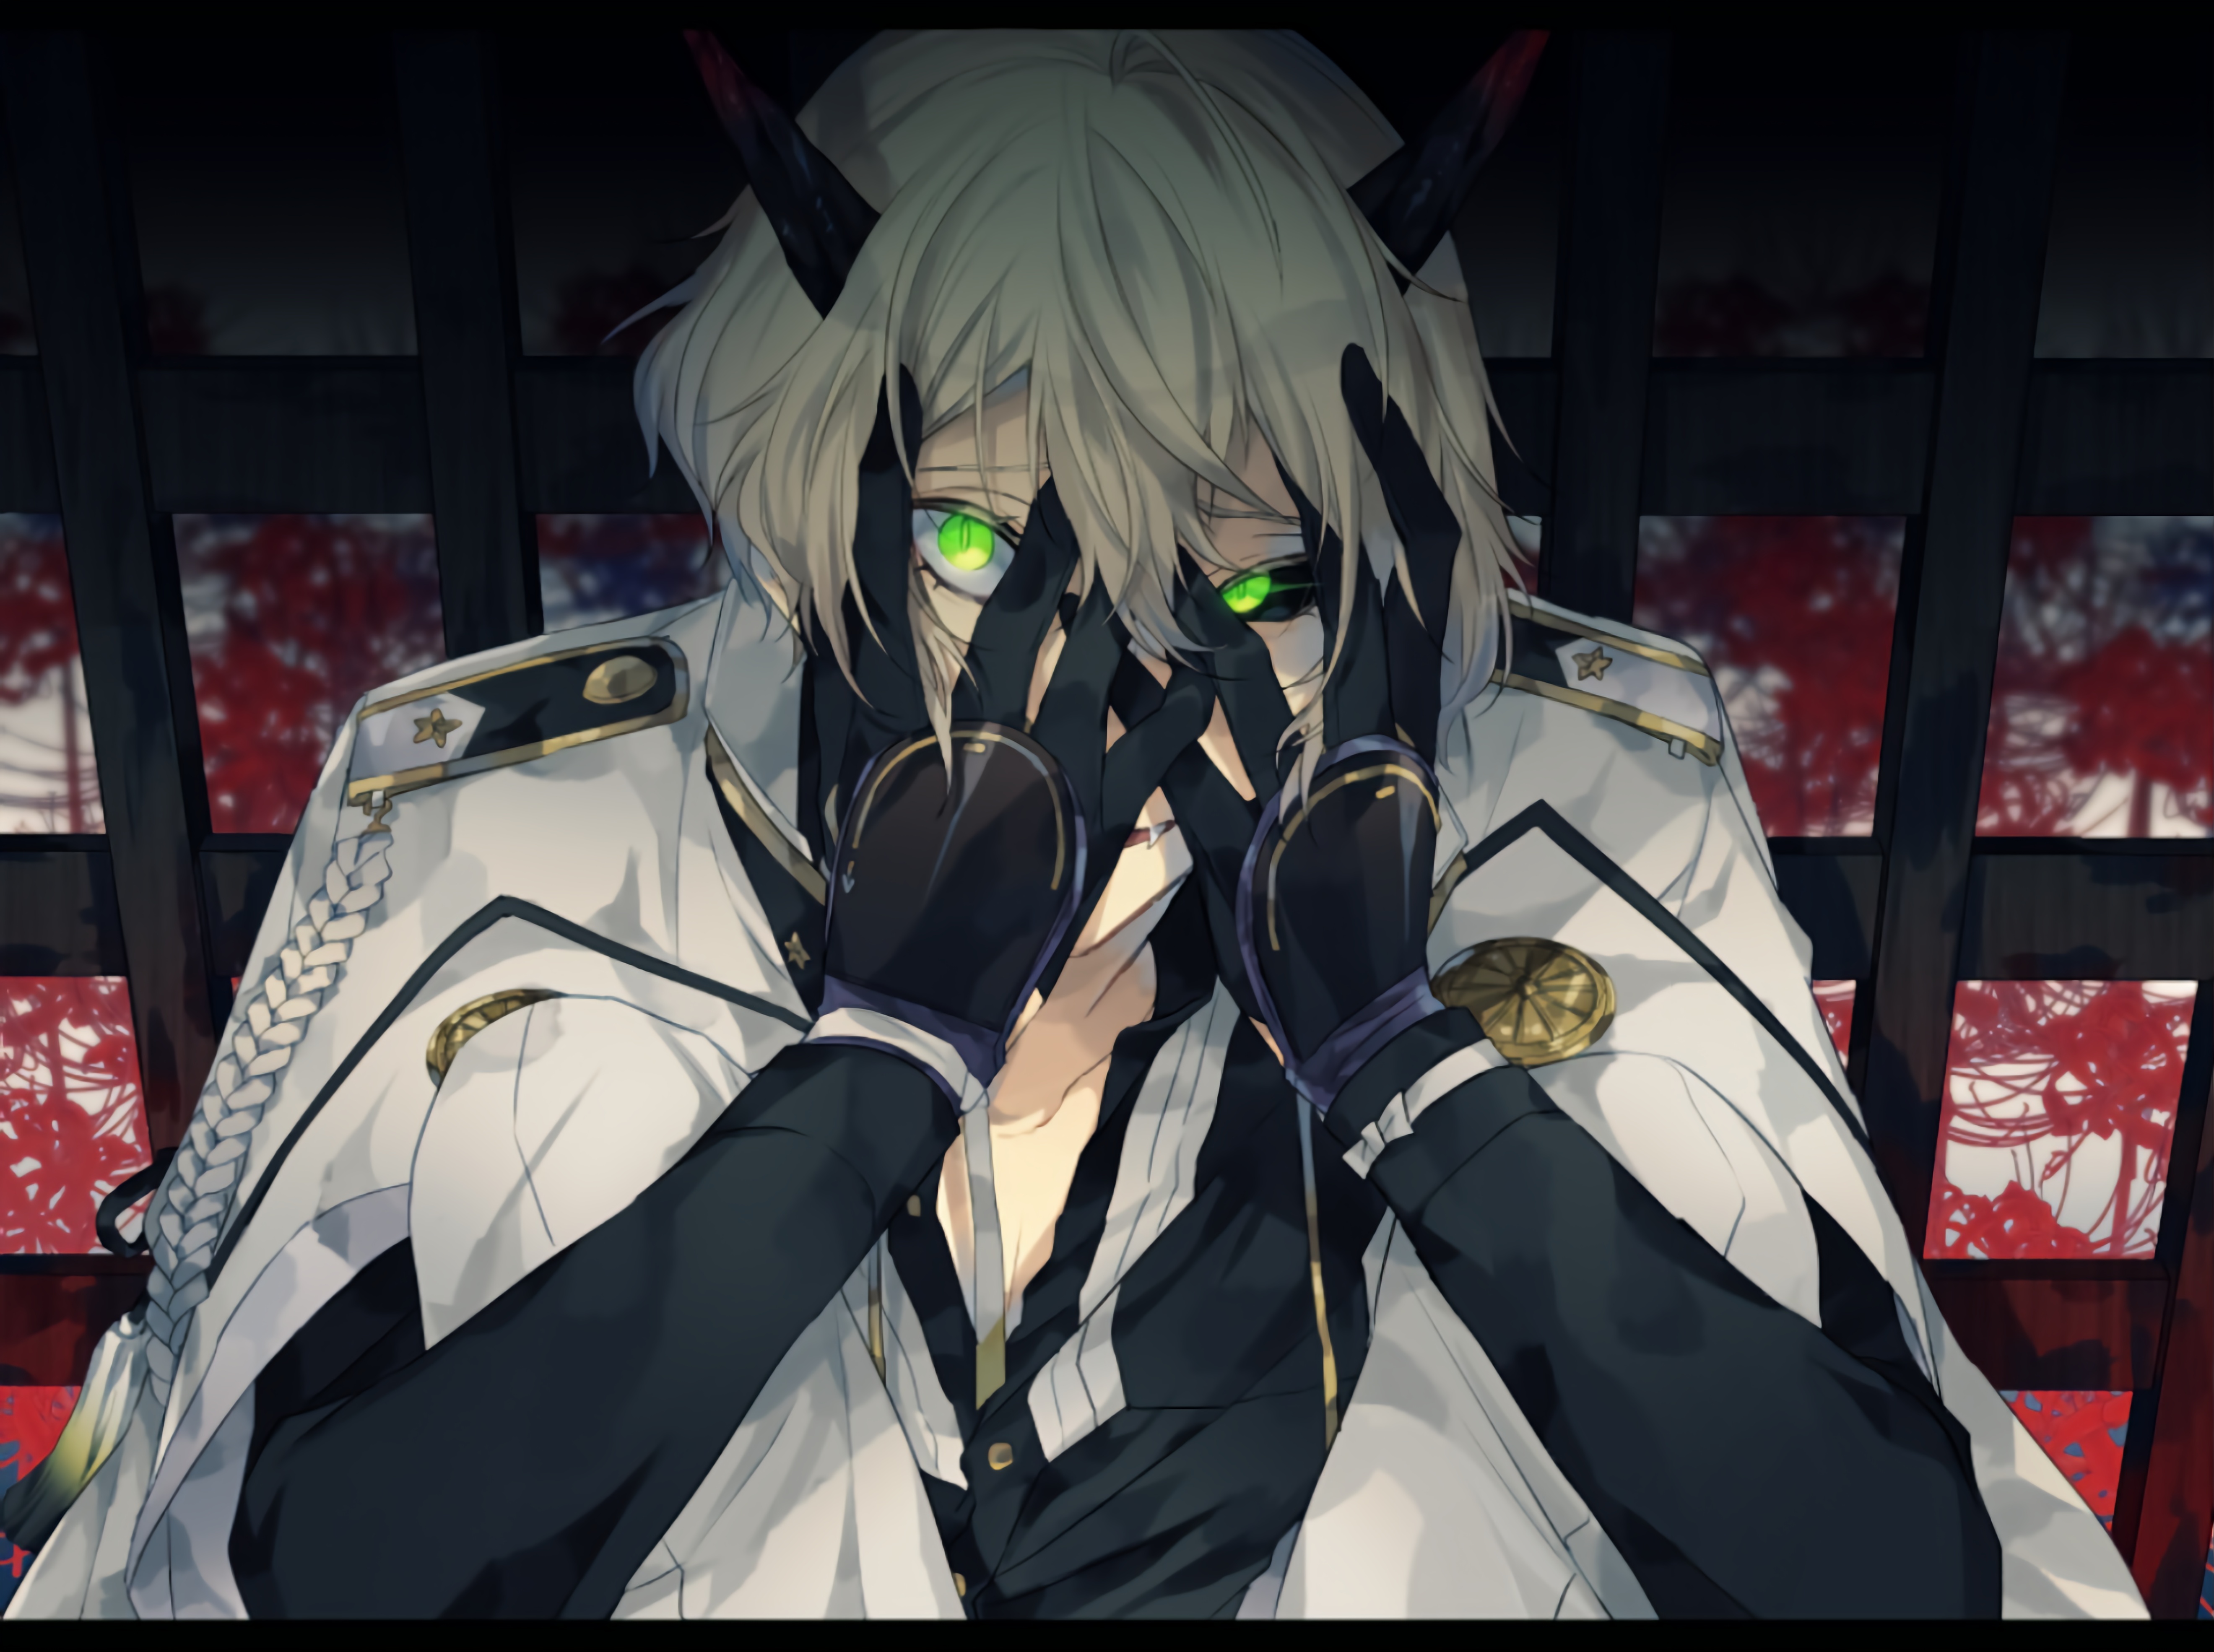 Hand On Face Horns Touken Ranbu Blonde Crazy Face Green Eyes Anime Male  Spider Lilies Fangs Glowing Wallpaper - Resolution:5280x3940 - ID:139525 -  